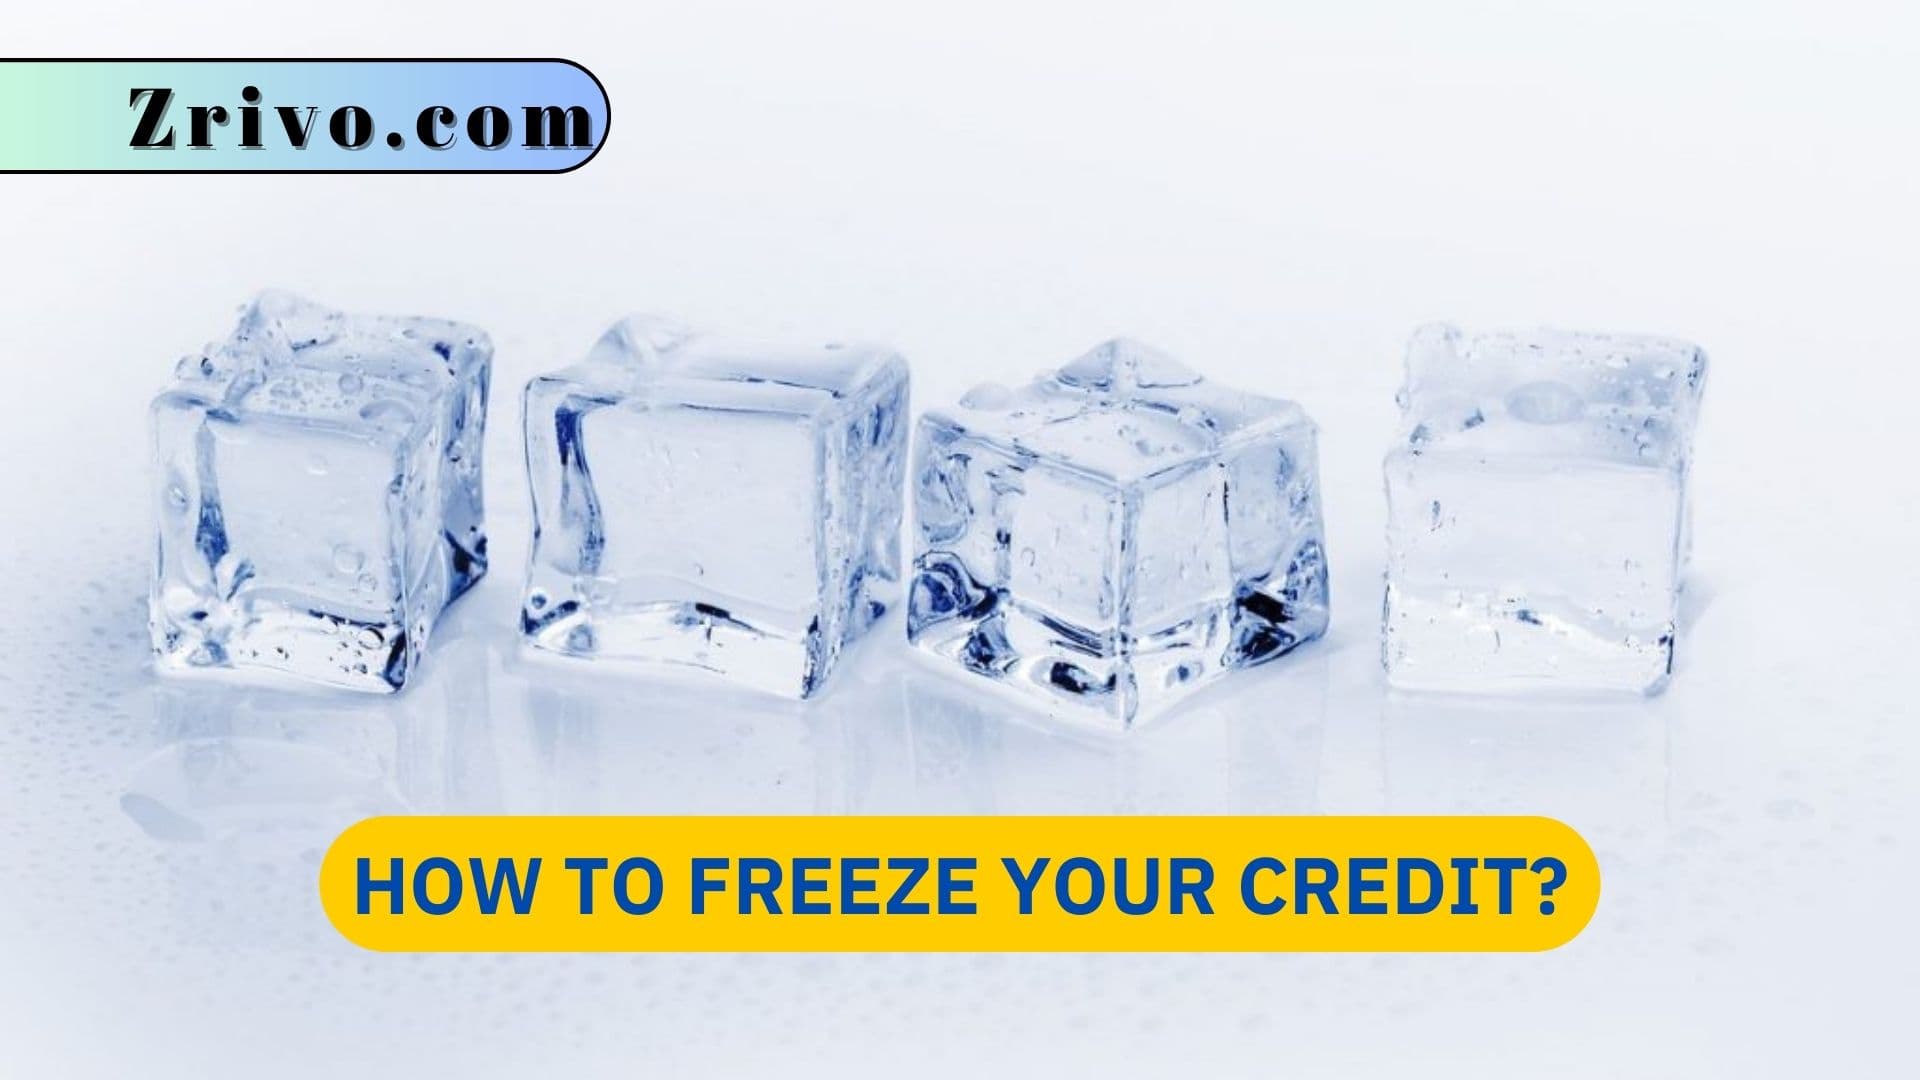 How to Freeze Your Credit